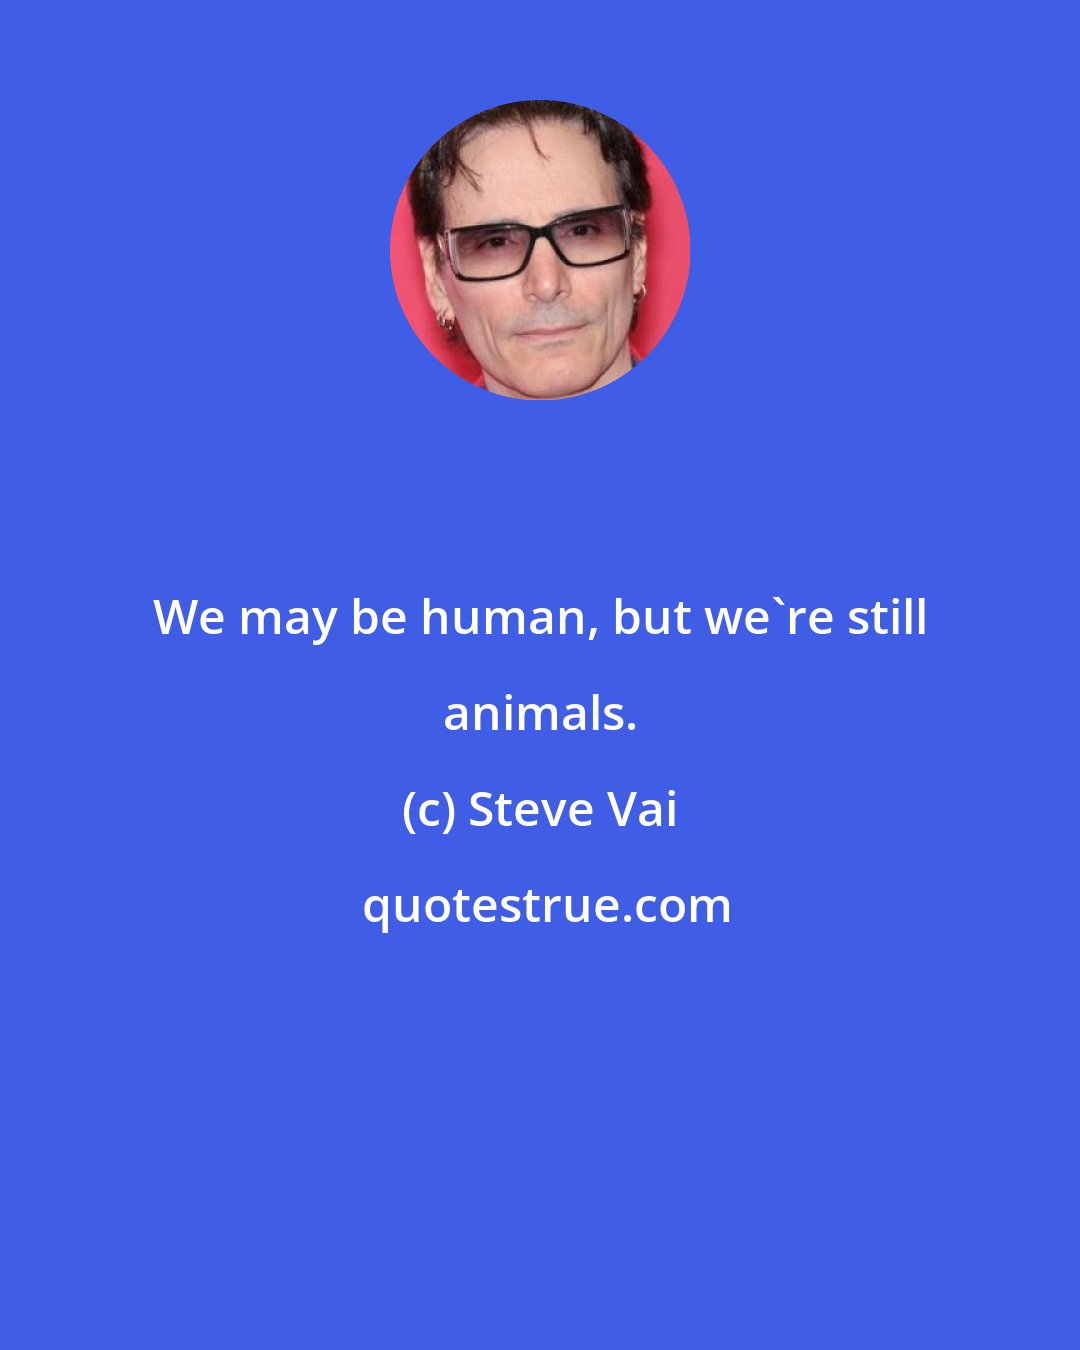 Steve Vai: We may be human, but we're still animals.